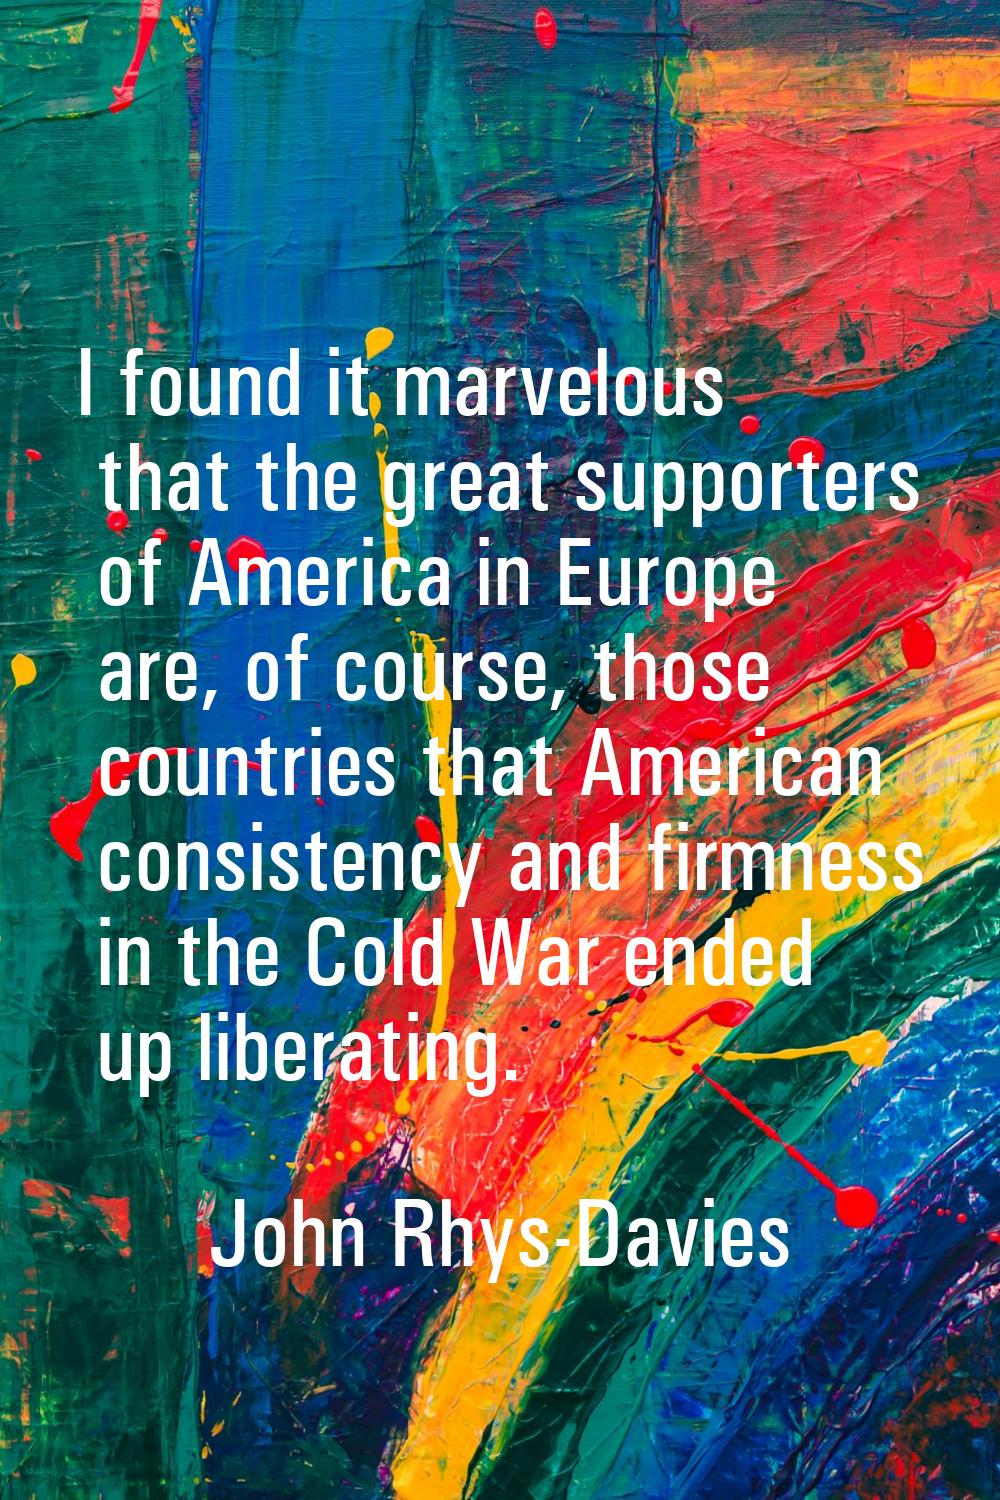 I found it marvelous that the great supporters of America in Europe are, of course, those countries